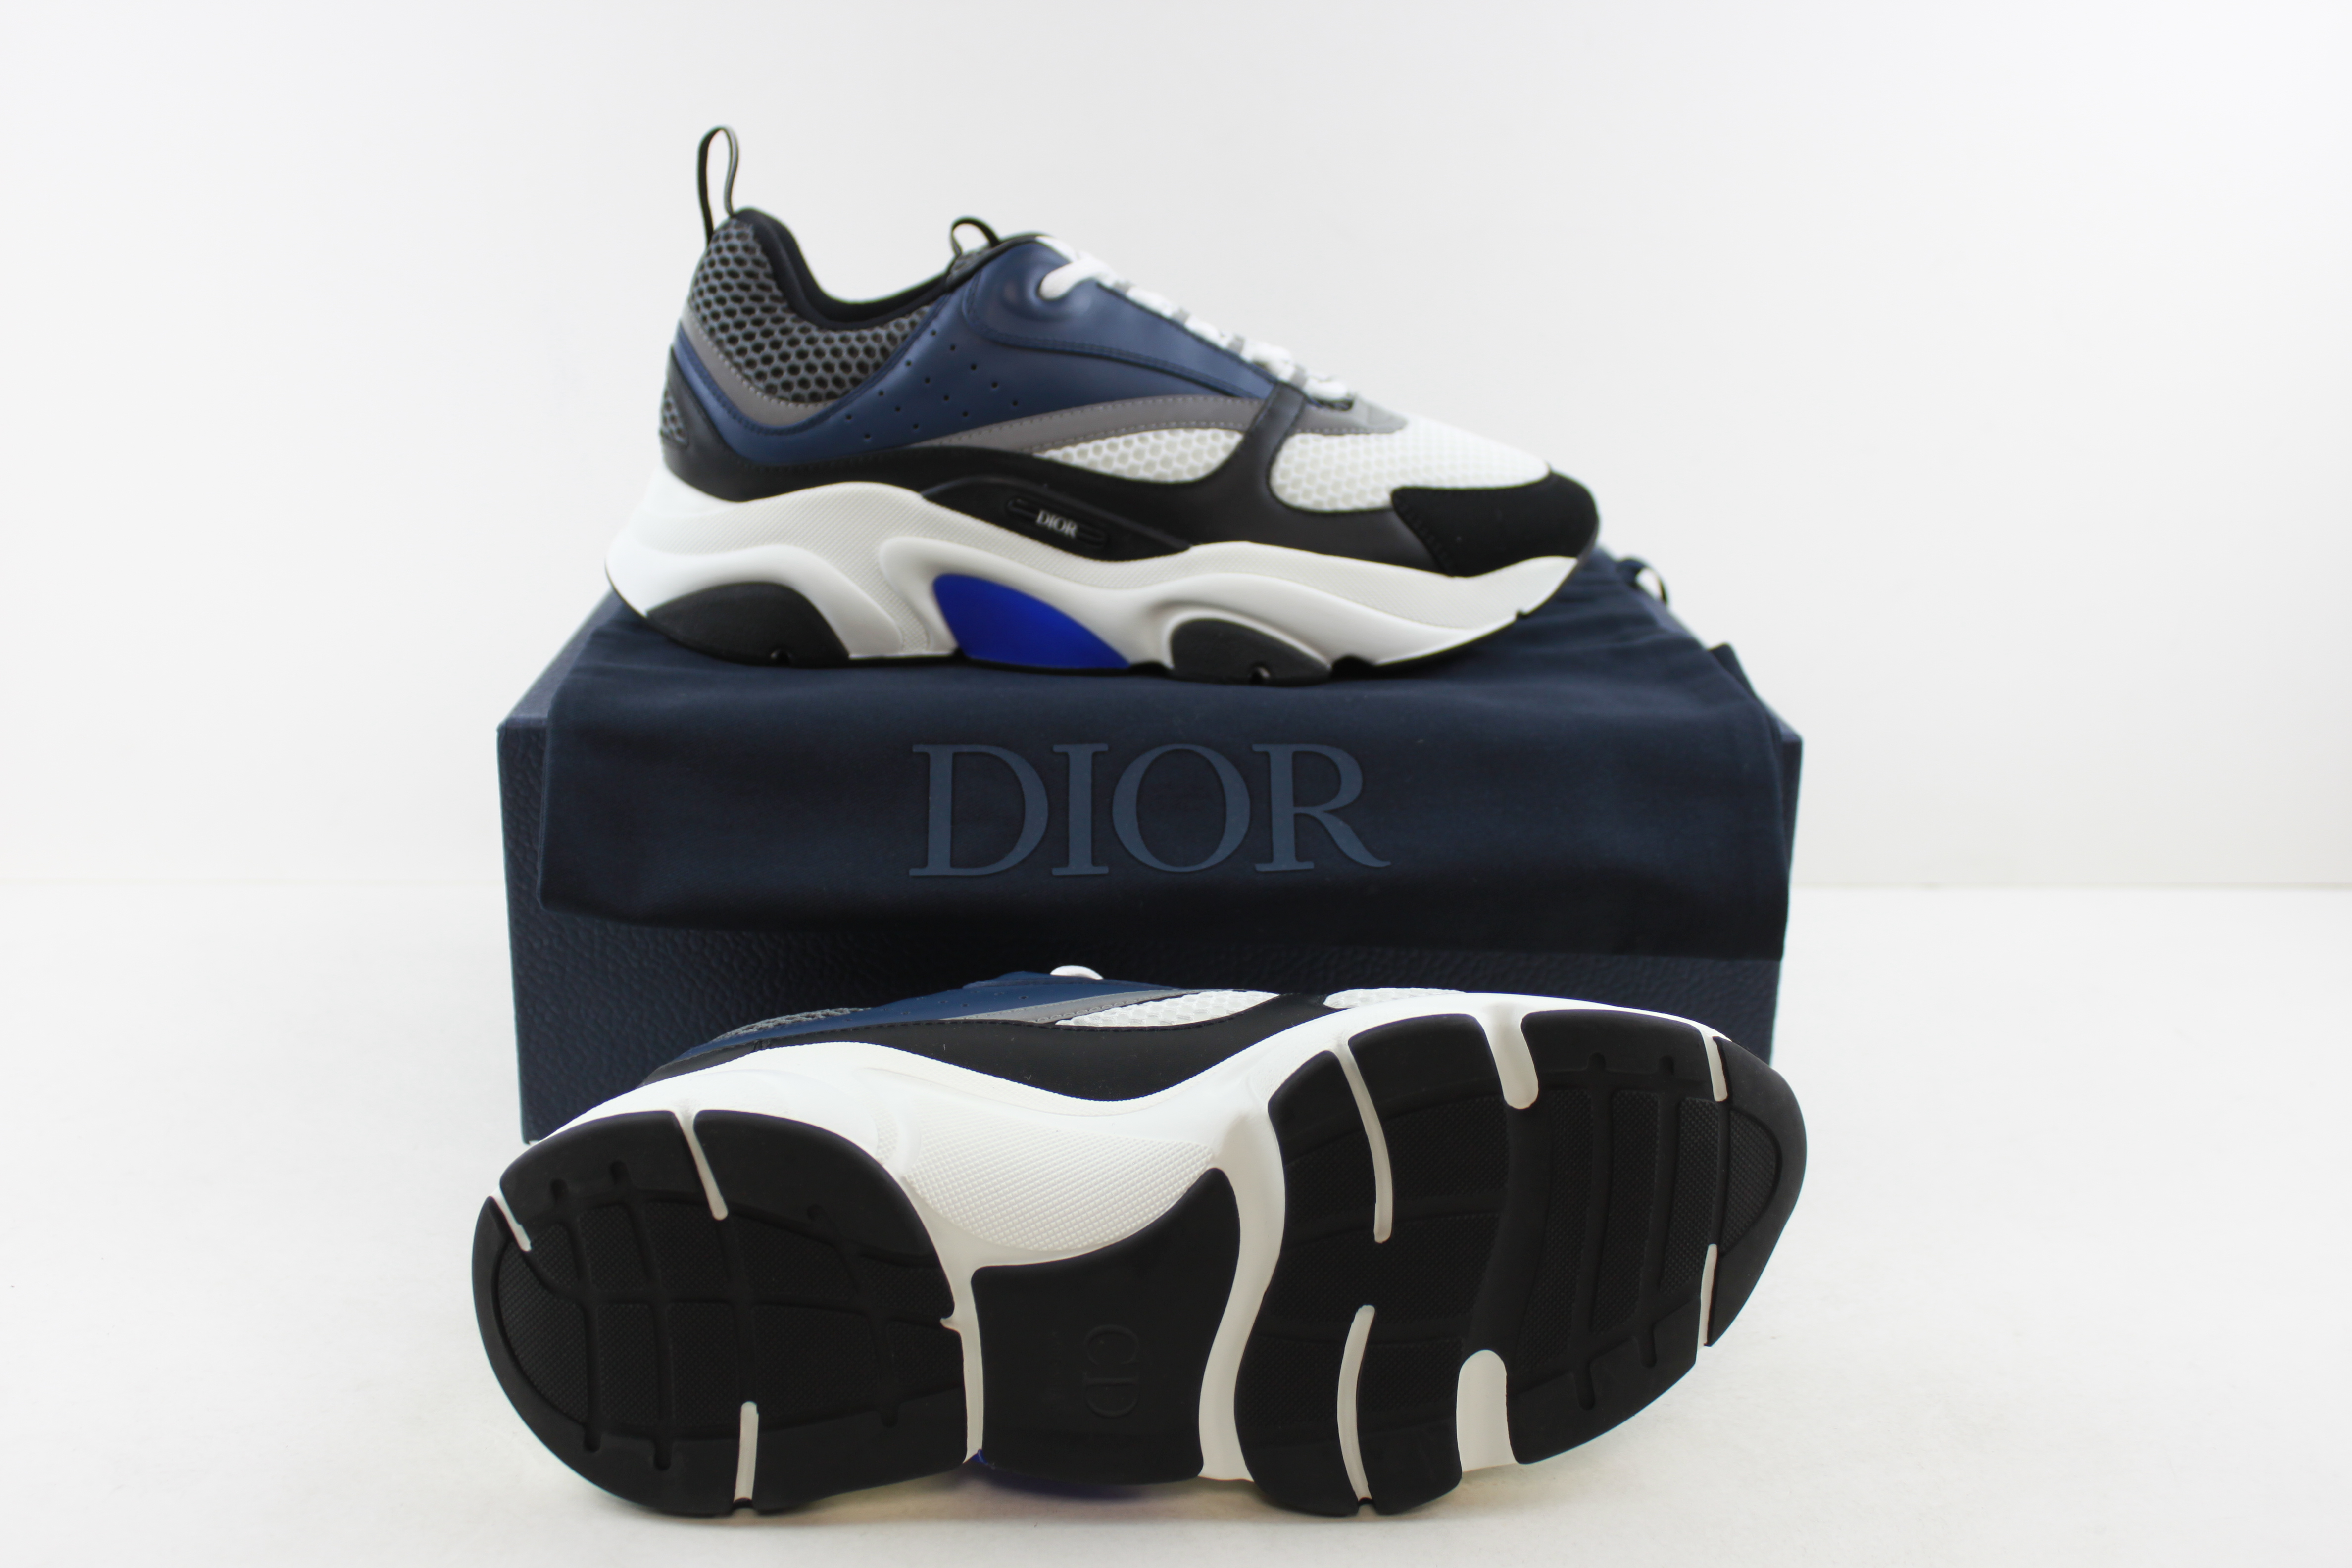 Dior Men's Trainers, Blue and Black, UK 7.5 - Image 2 of 2